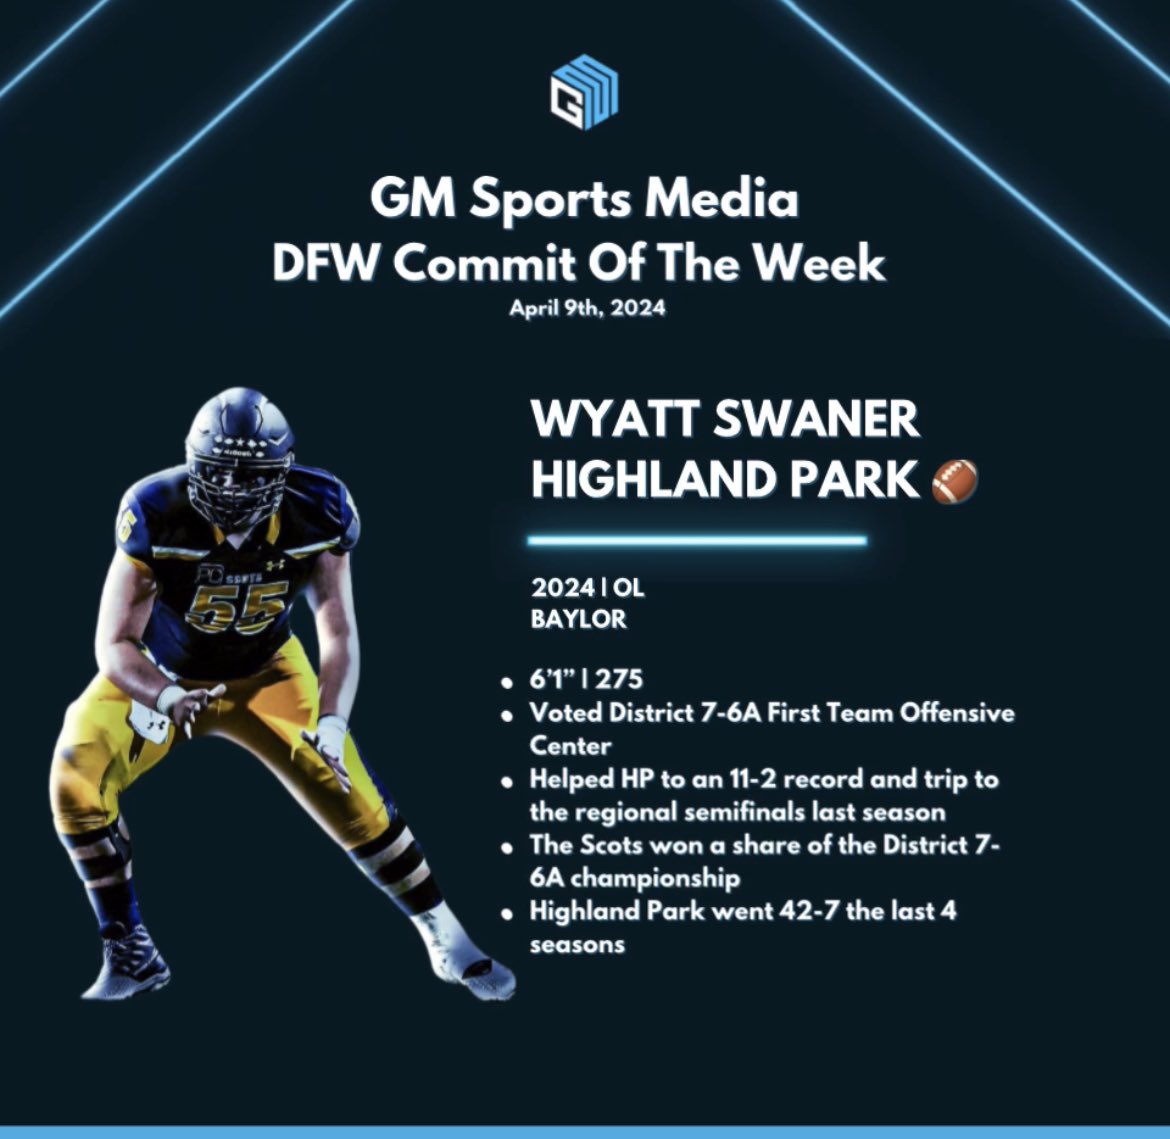 GM SPORTS MEDIA DFW COMMIT OF THE WEEK ‼️‼️ April 9th 2024 WYATT SWANER, HIGHLAND PARK 2024 OC | Baylor 🏈 ⭐️ Helped HP to an 11-2 record and trip to the regional semifinals last season ⭐️ Was voted District 7-6A First Team Offensive Center #baylor #txhsfb #commitment #sicem